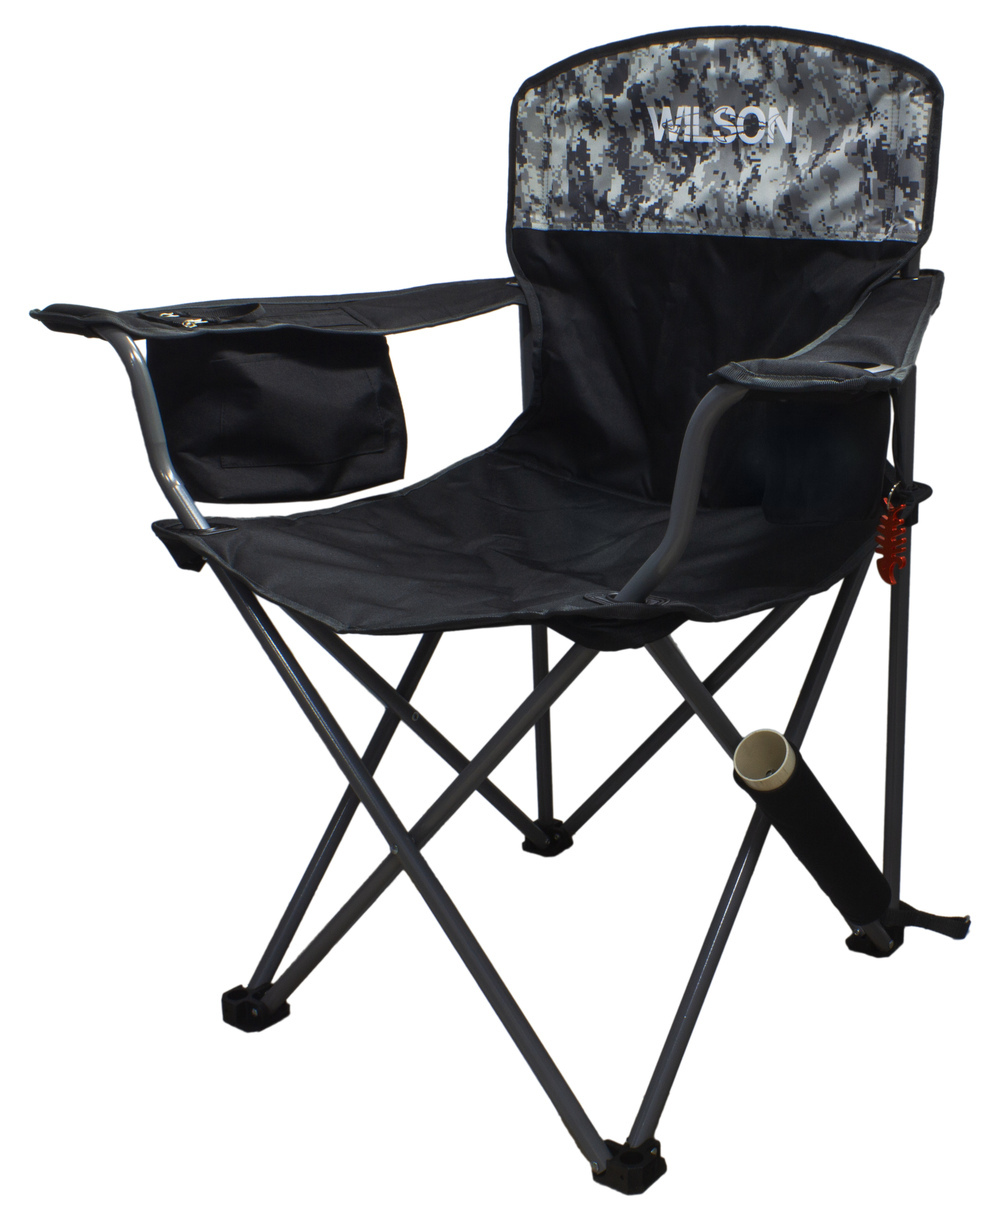 Wilson Digi Camo Camping/Fishing Chair with Lined Cooler Bag